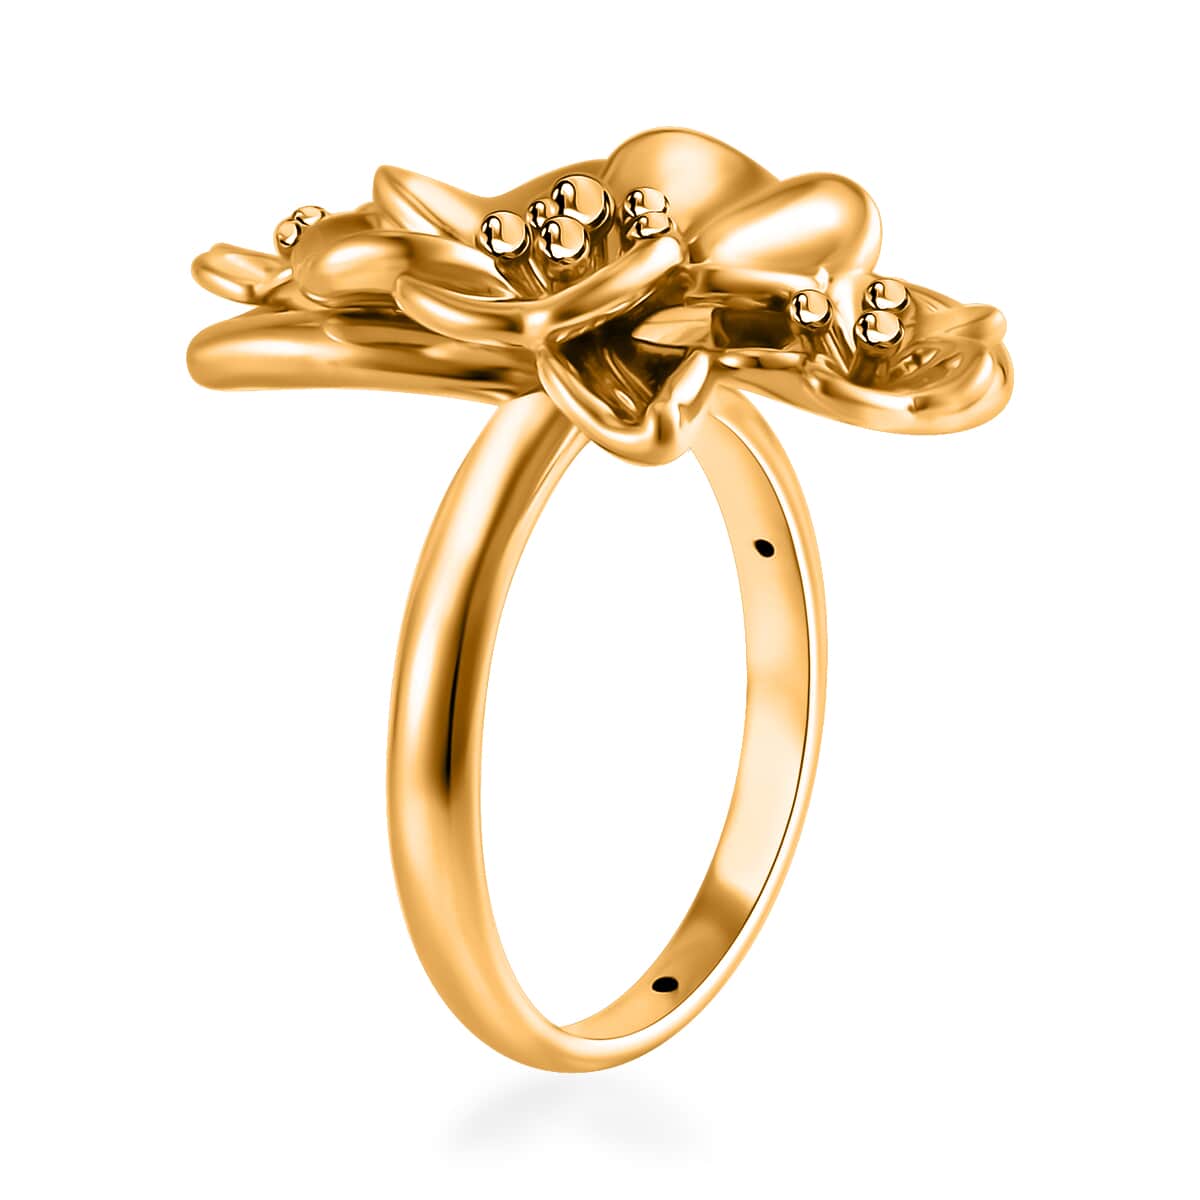 No Brand  24K : Yellow : Gold : Standard  Ring,  Gold Wt. 2.8 g image number 2